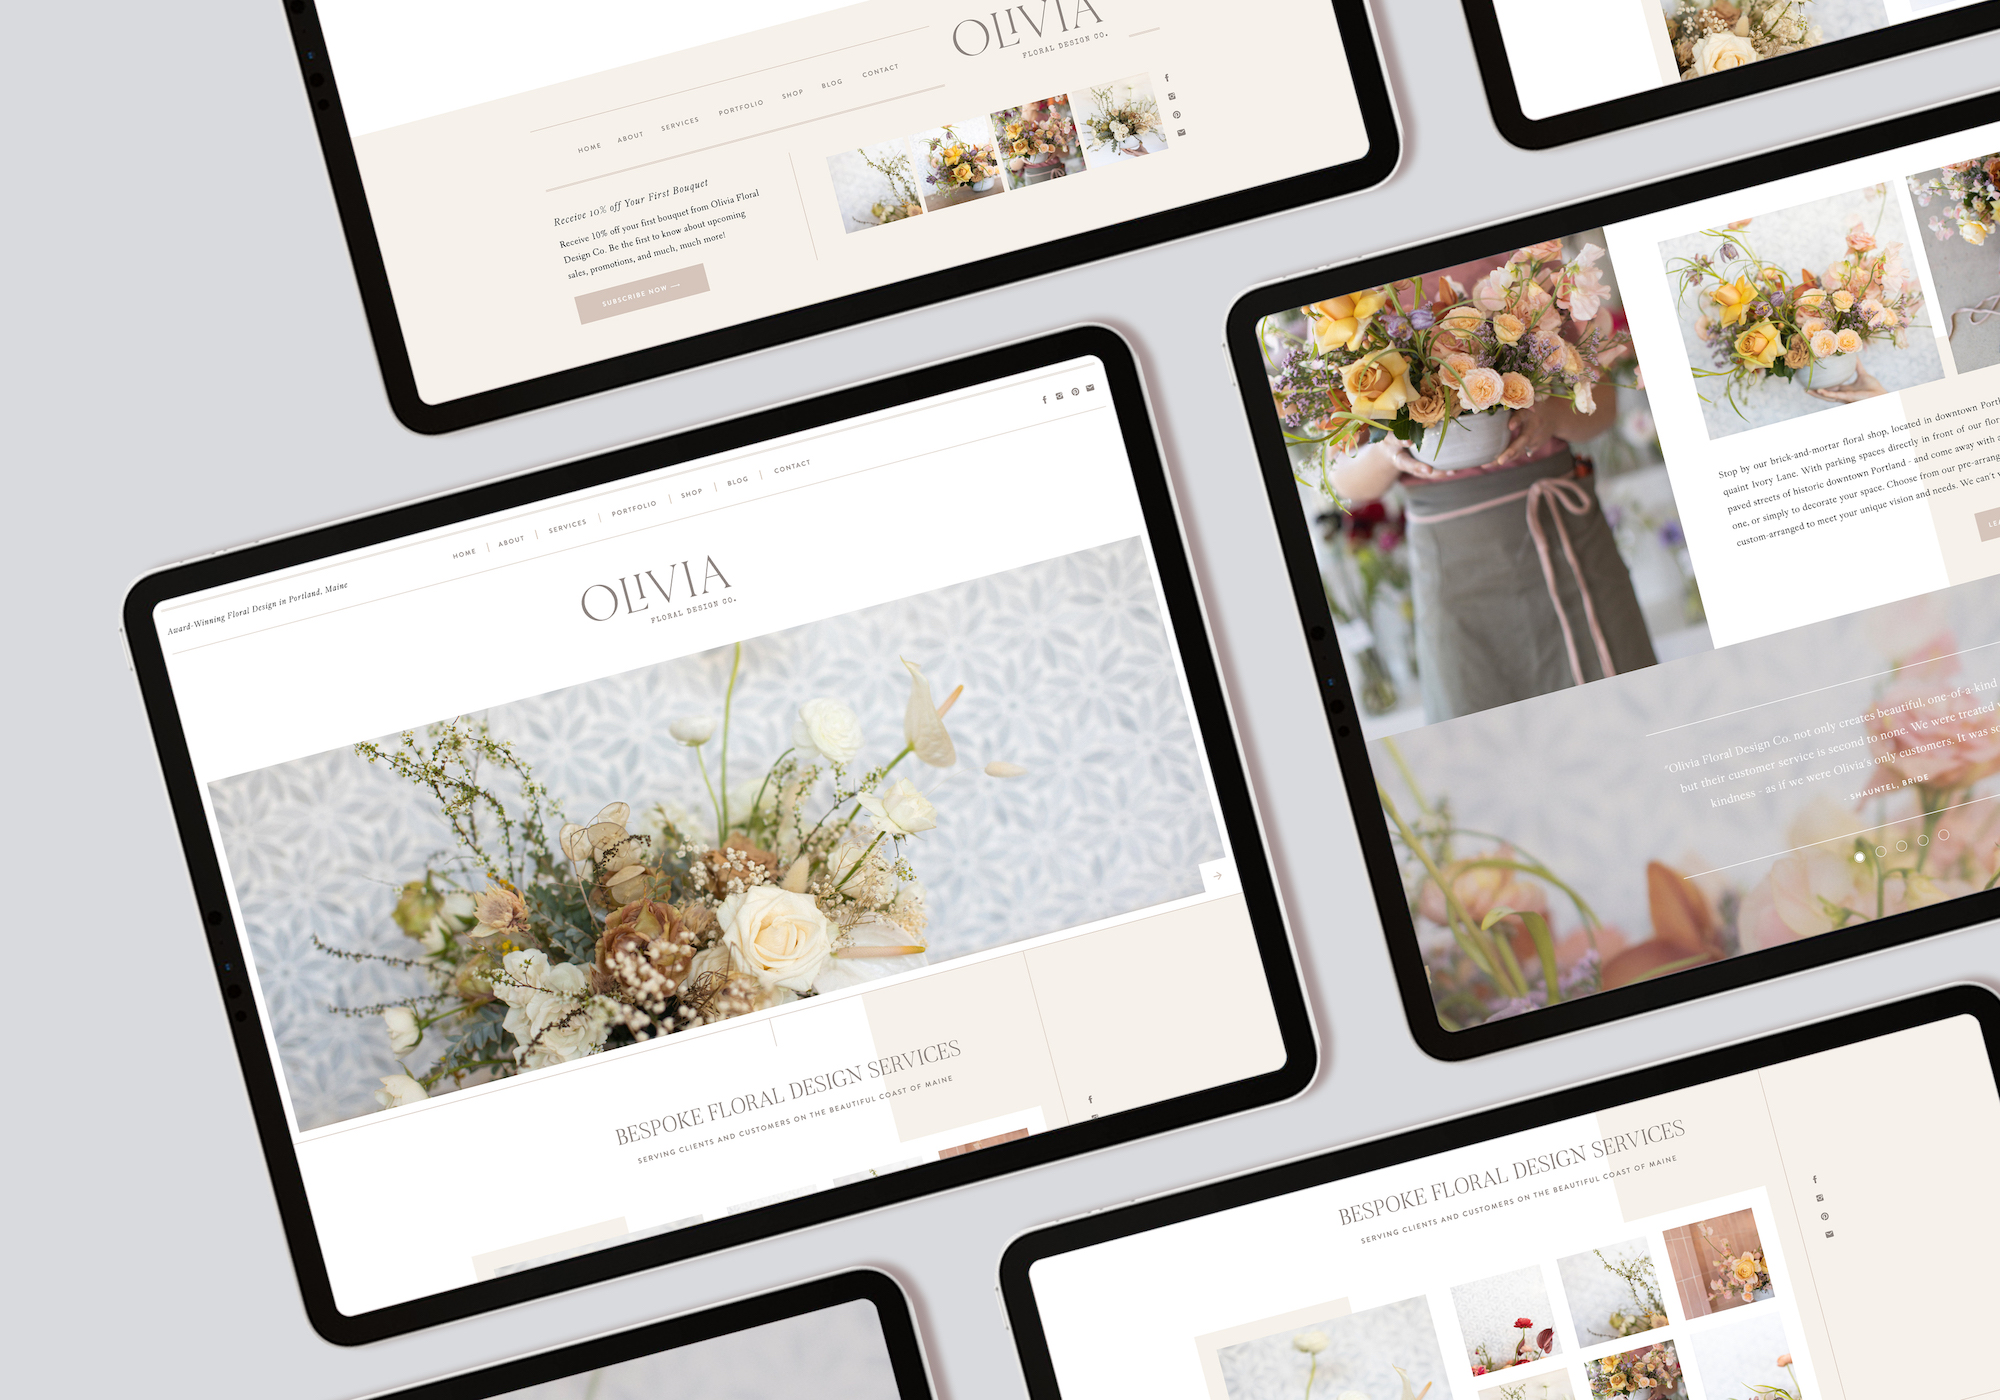 Olivia - Showit Website Template for Floral Designers Wedding Professionals Photographers Planners and More - 1